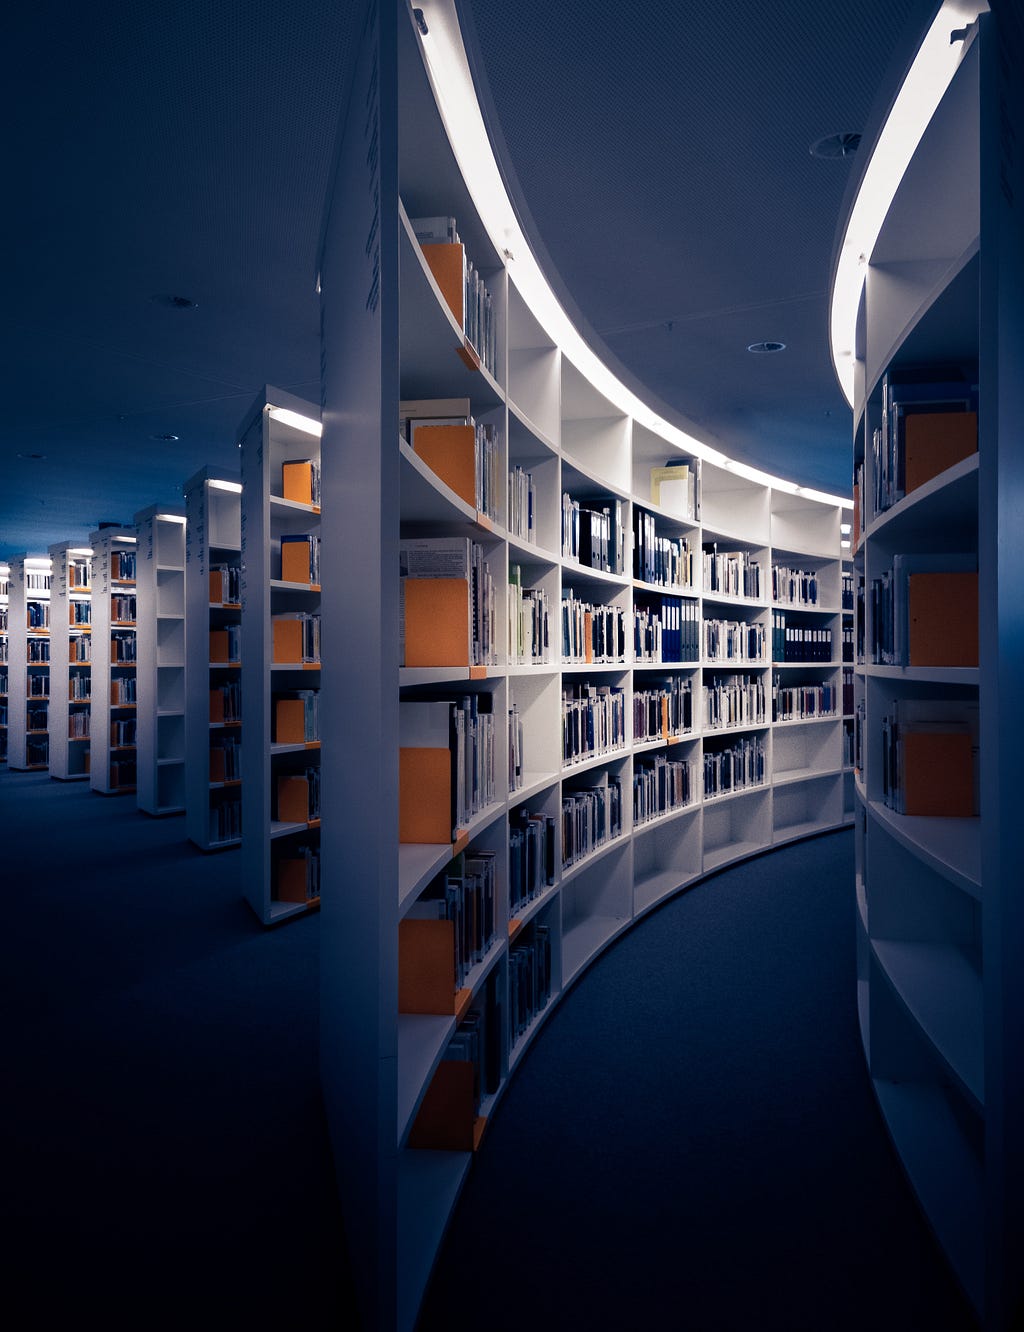 A library of books in a curved shelves